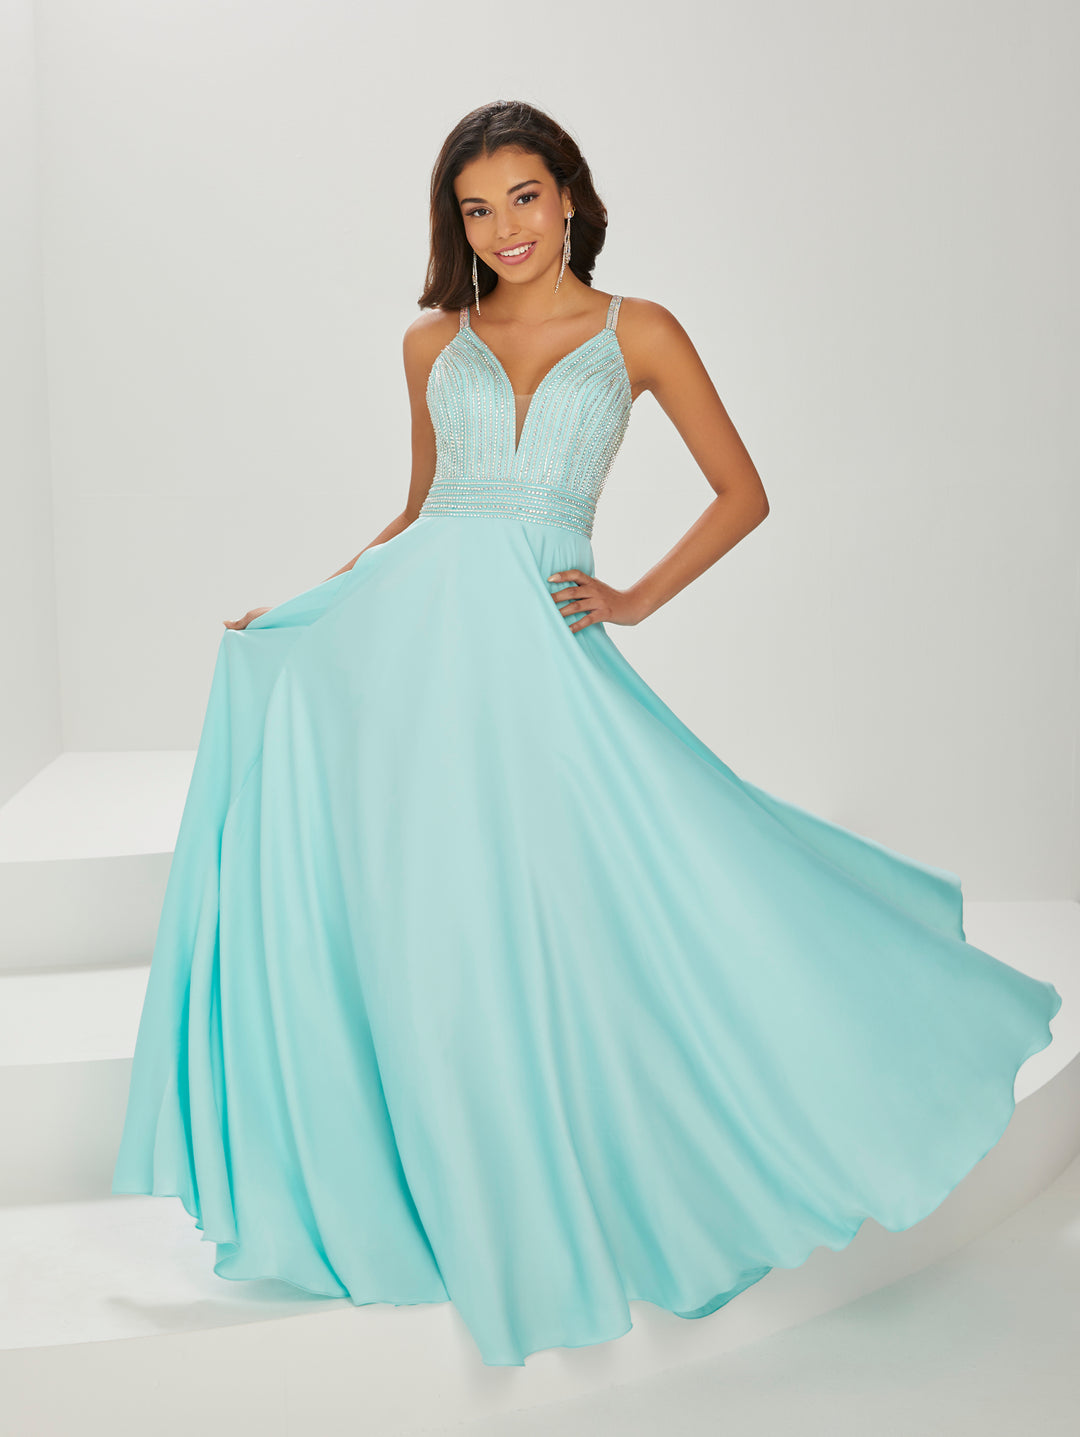 Beaded Crepe Chiffon A-line Gown by Tiffany Designs 16927